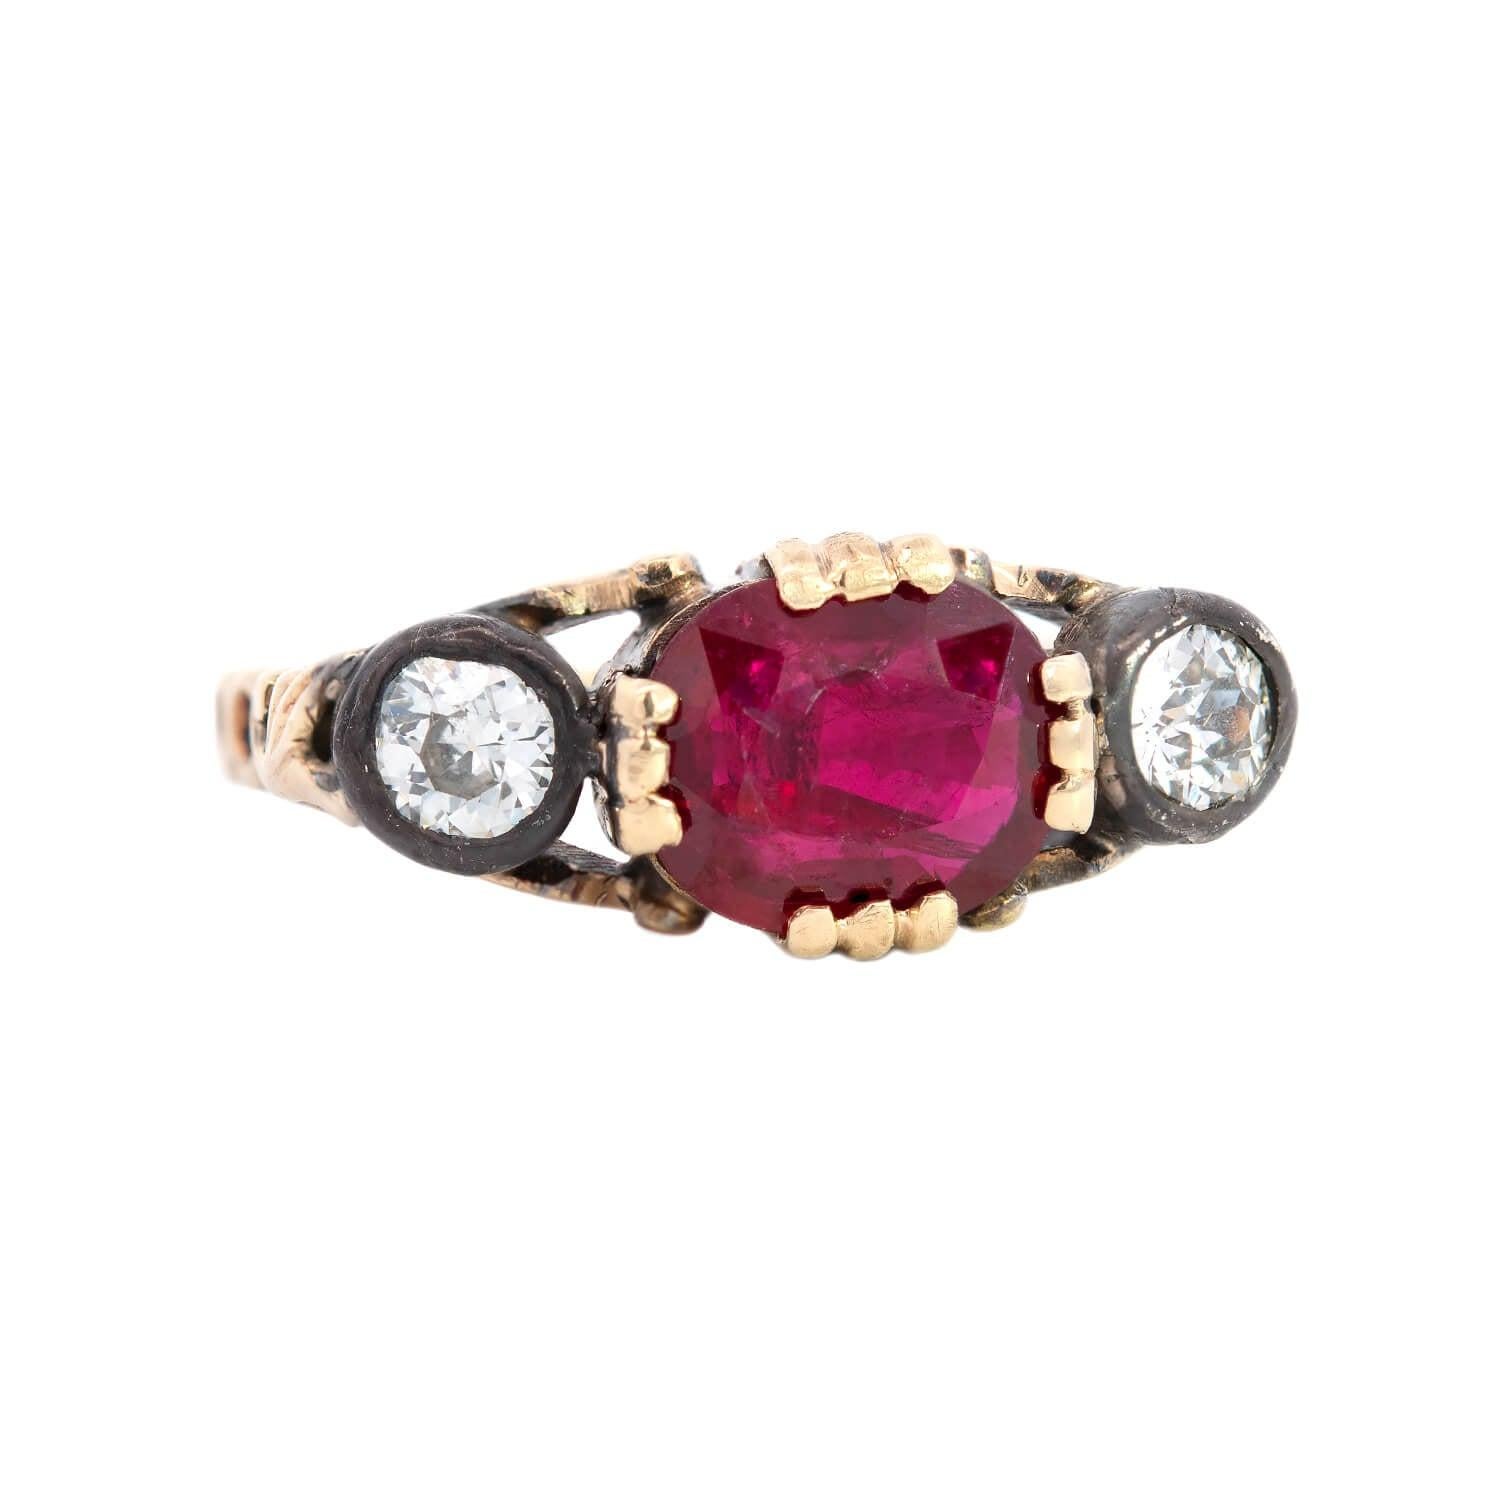 A beautiful gemstone ring from the Late Victorian (ca1900) era! This gorgeous piece is crafted in 14k yellow gold and sterling silver and features a beautiful ruby in 4 triple prongs between the sparkling diamonds. Set in the center is a single